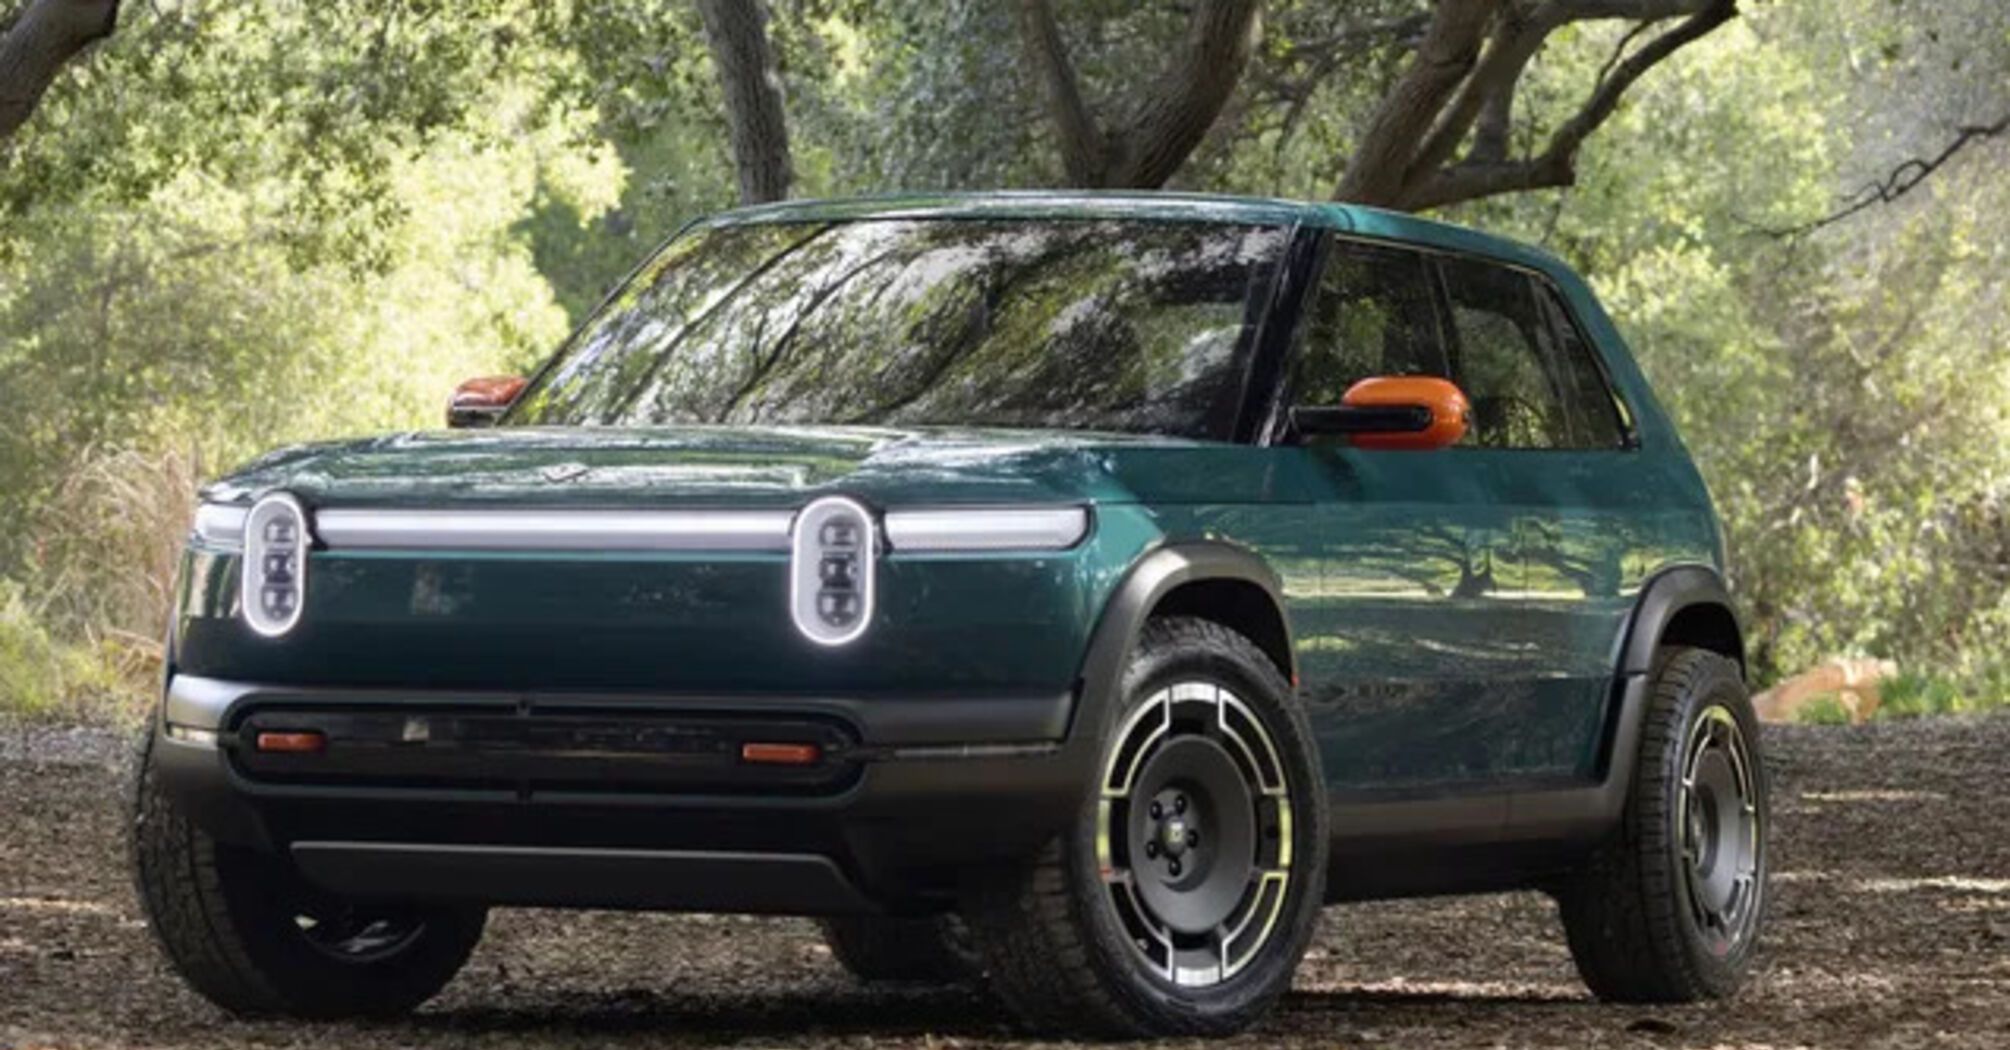 Rivian is set to introduce their highly anticipated R3X